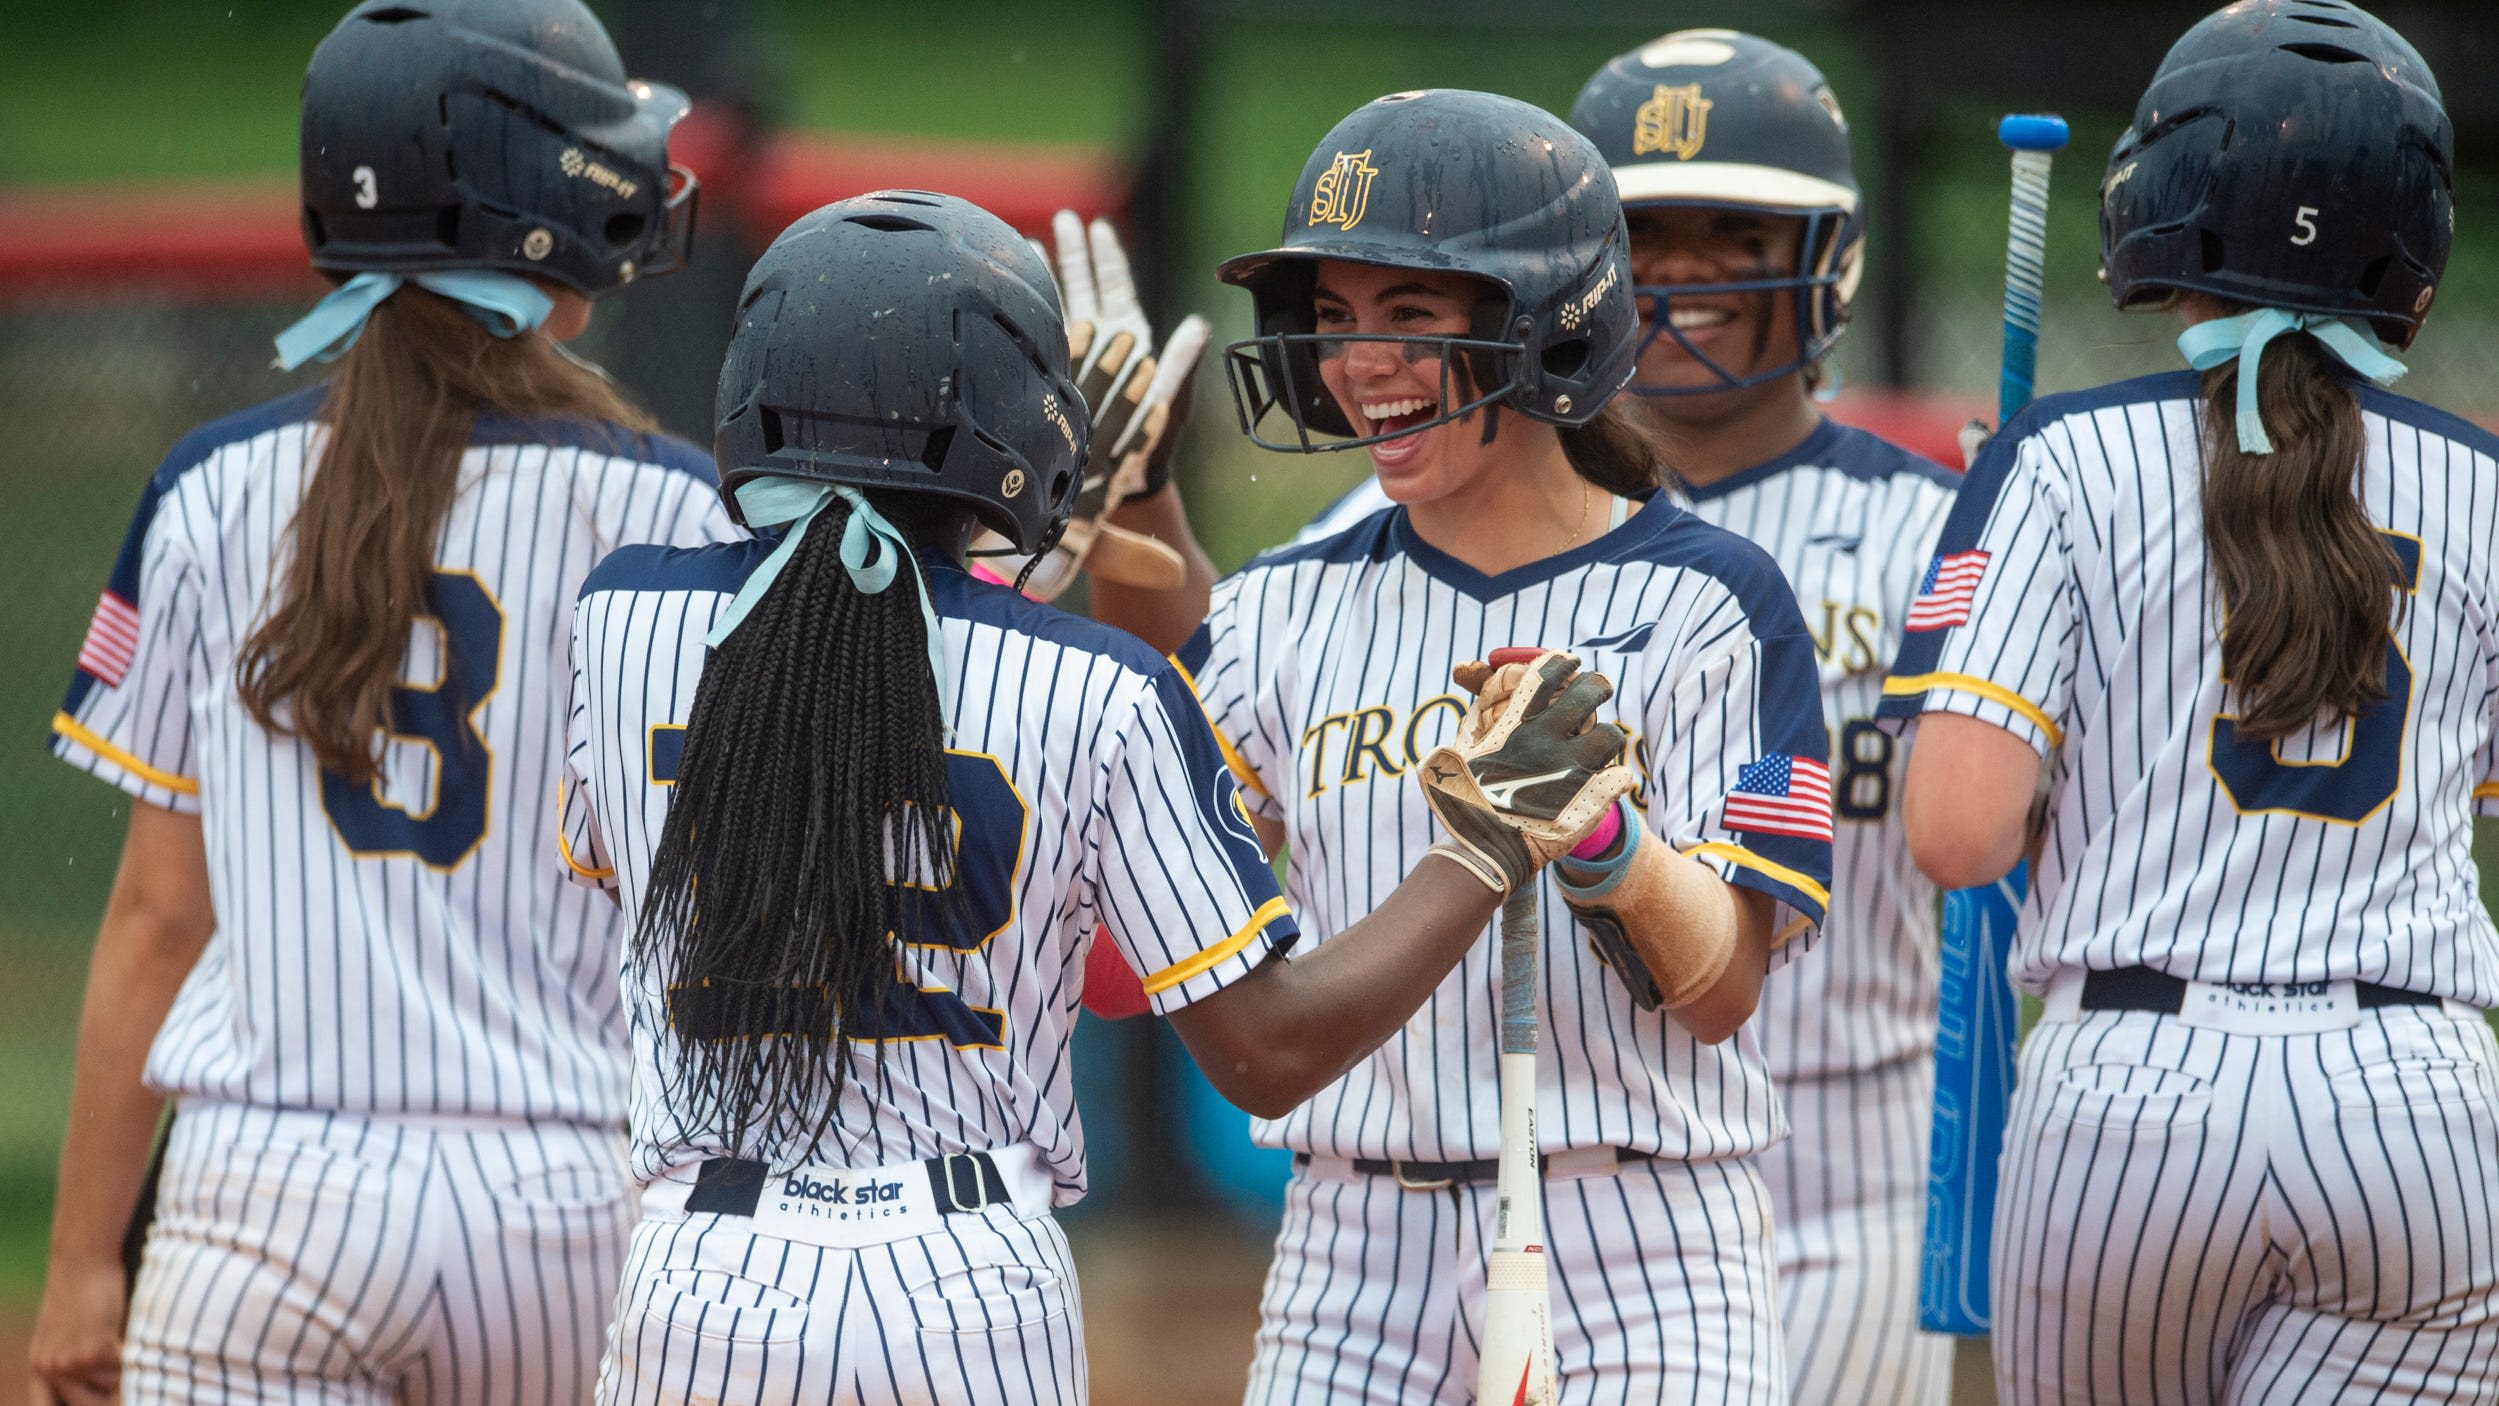 Saint James softball survives pitchers duel to take down Piedmont to open state tournament